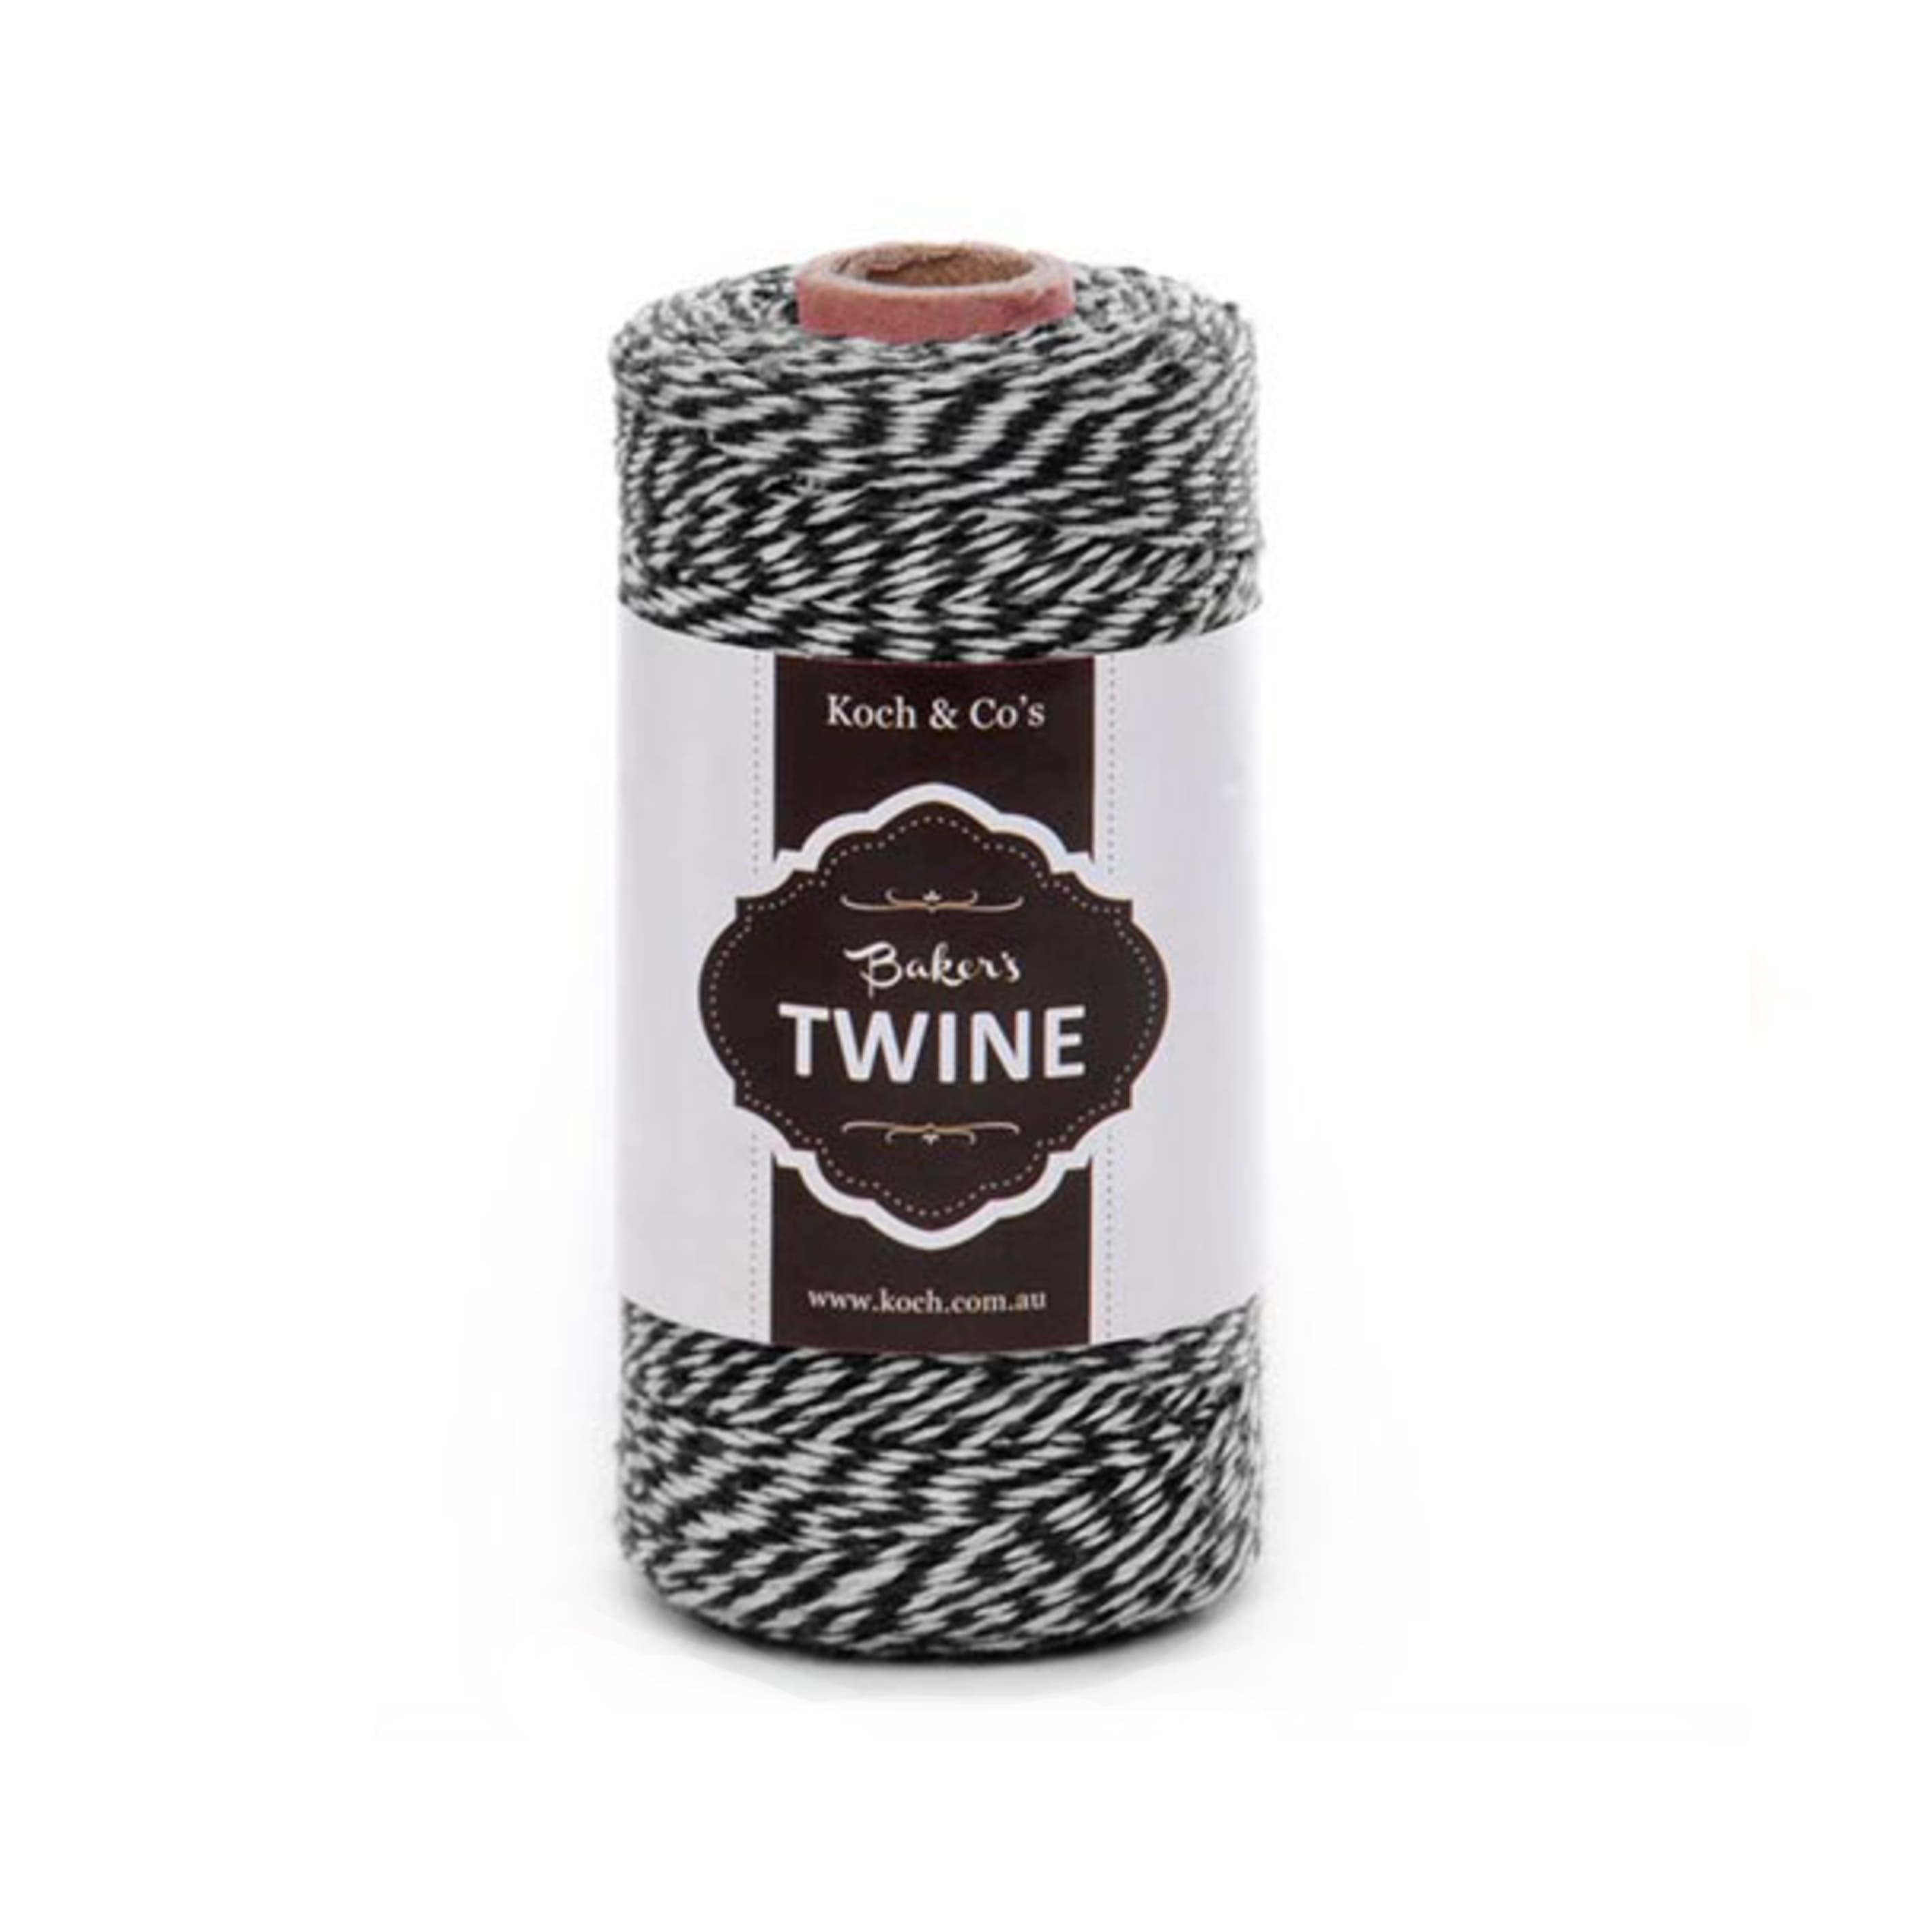 Baker's Twine | 1mm x 220 Metres |  4 COLOUR OPTIONS AVAILABLE